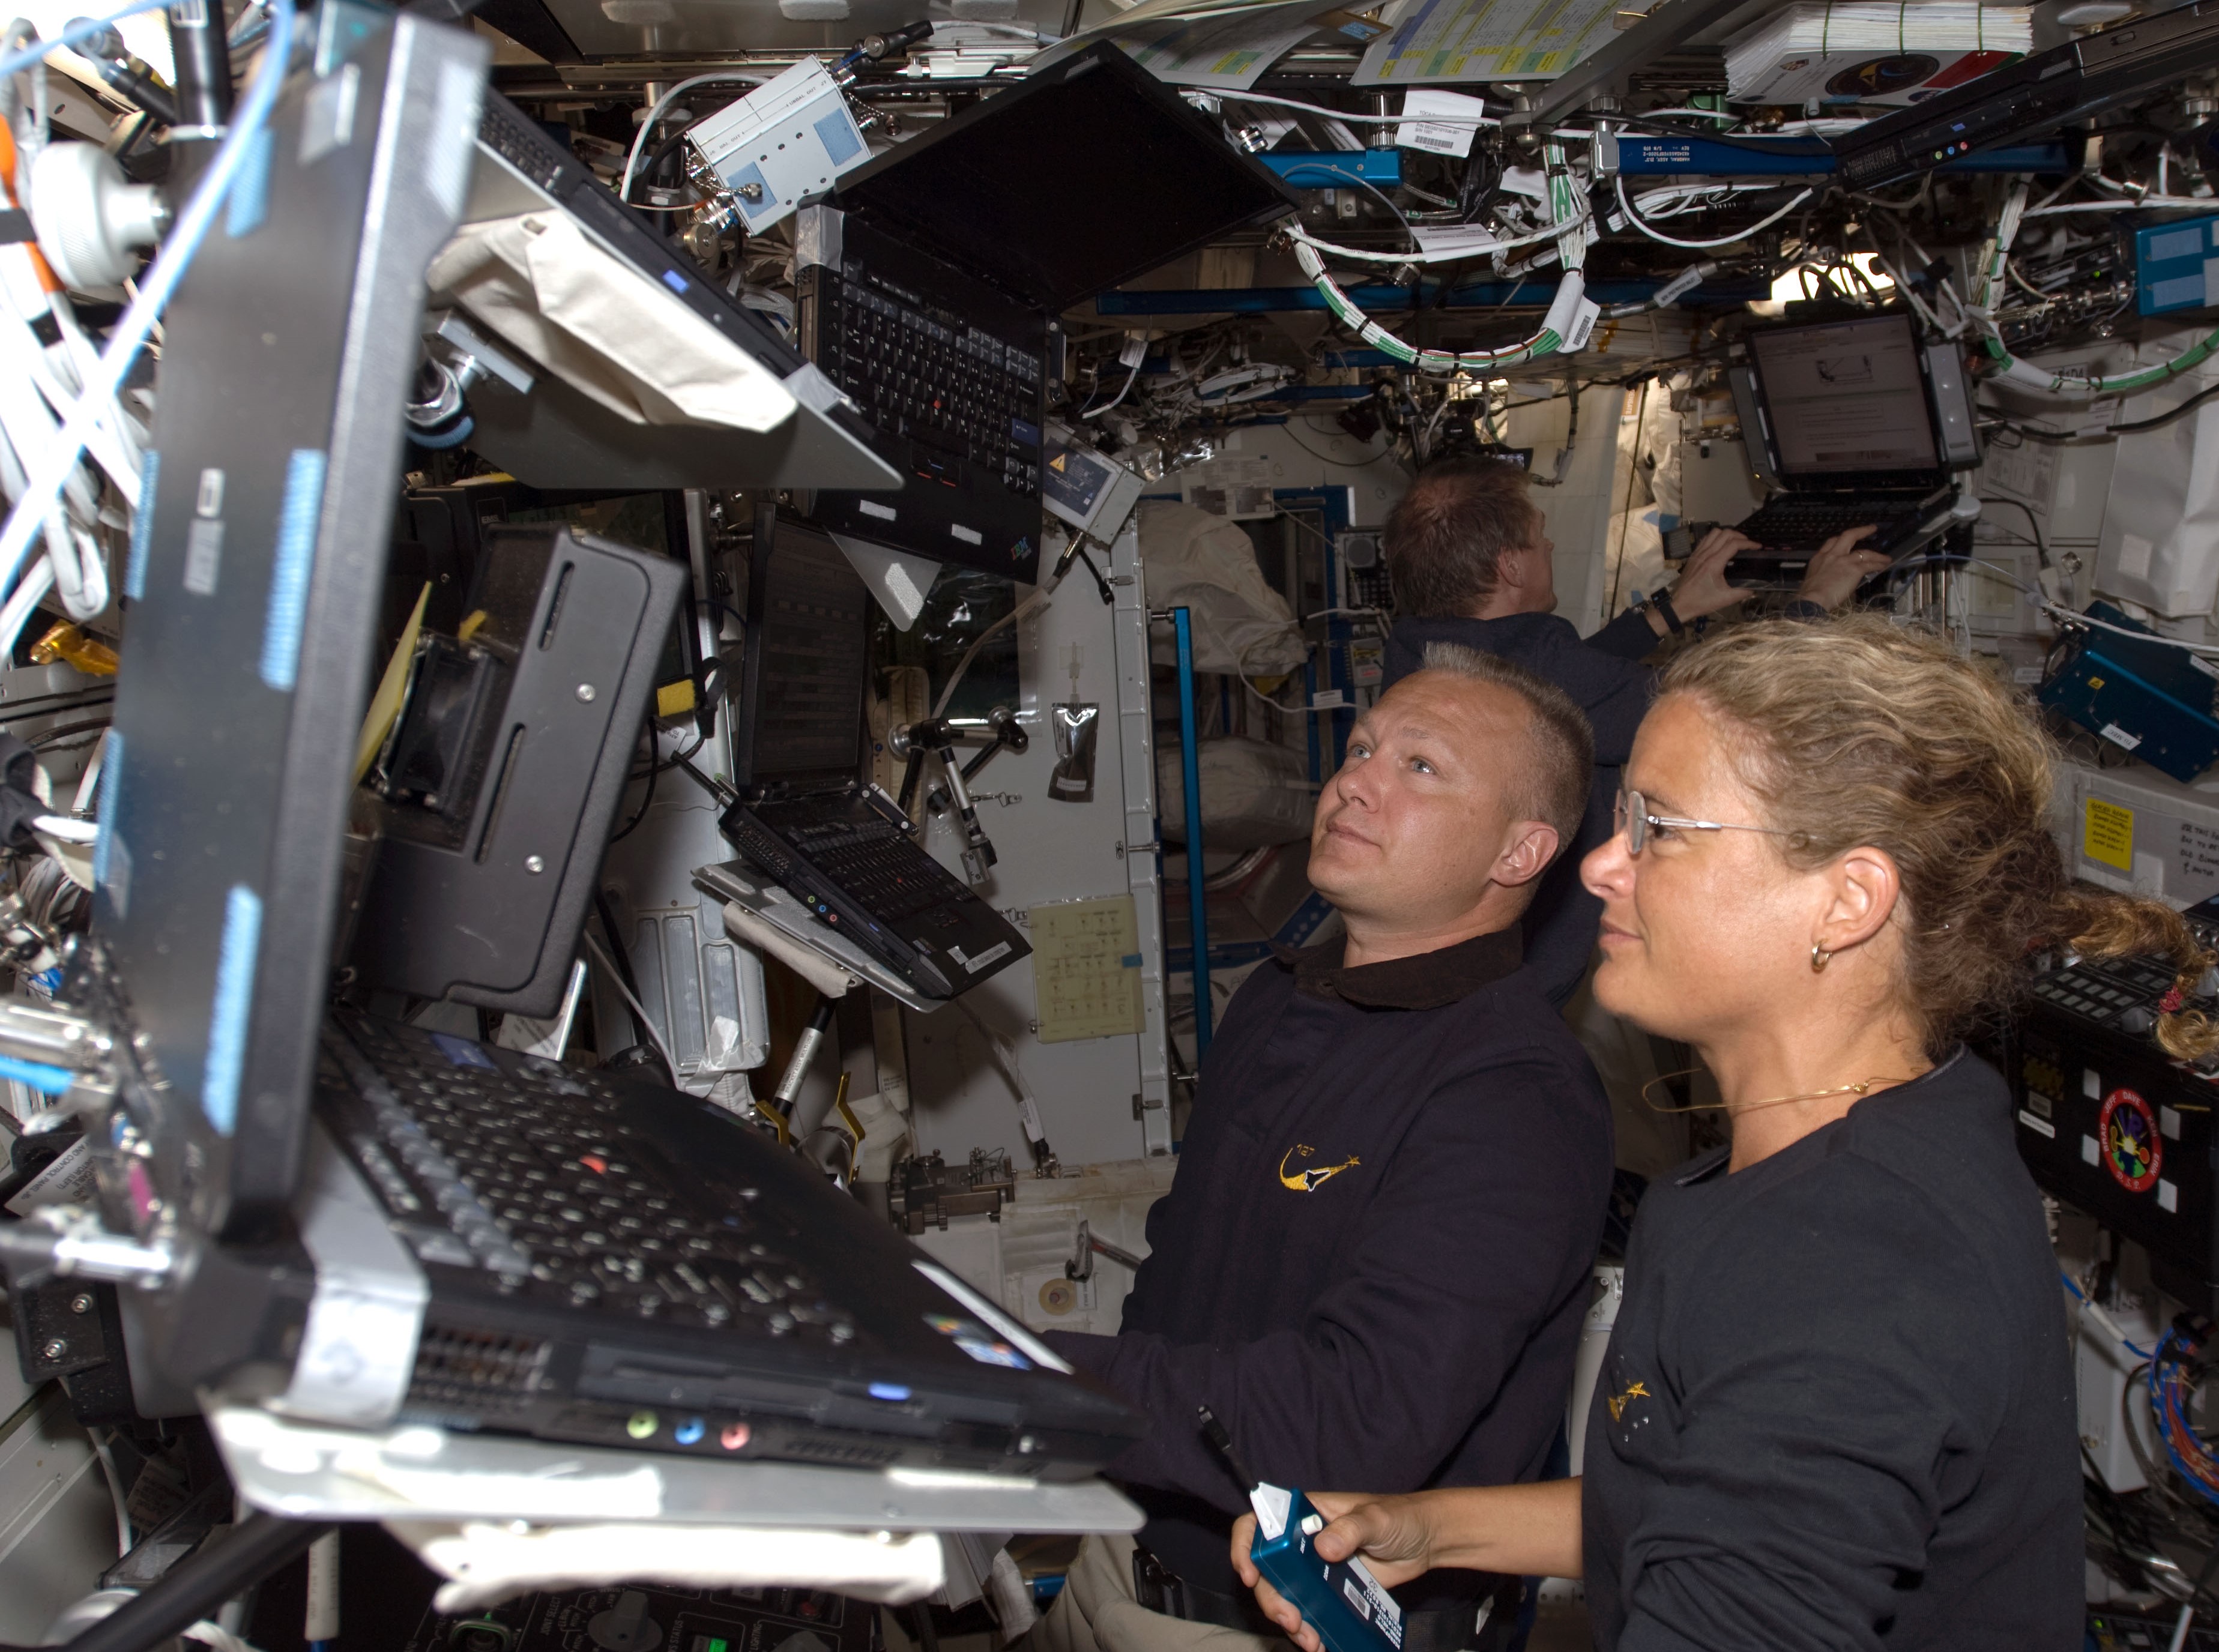 NASA astronaut Douglas G. Hurley, left, and Canadian Space Agency astronaut Julie Payette operate the station’s robotic arm during the second spacewalk